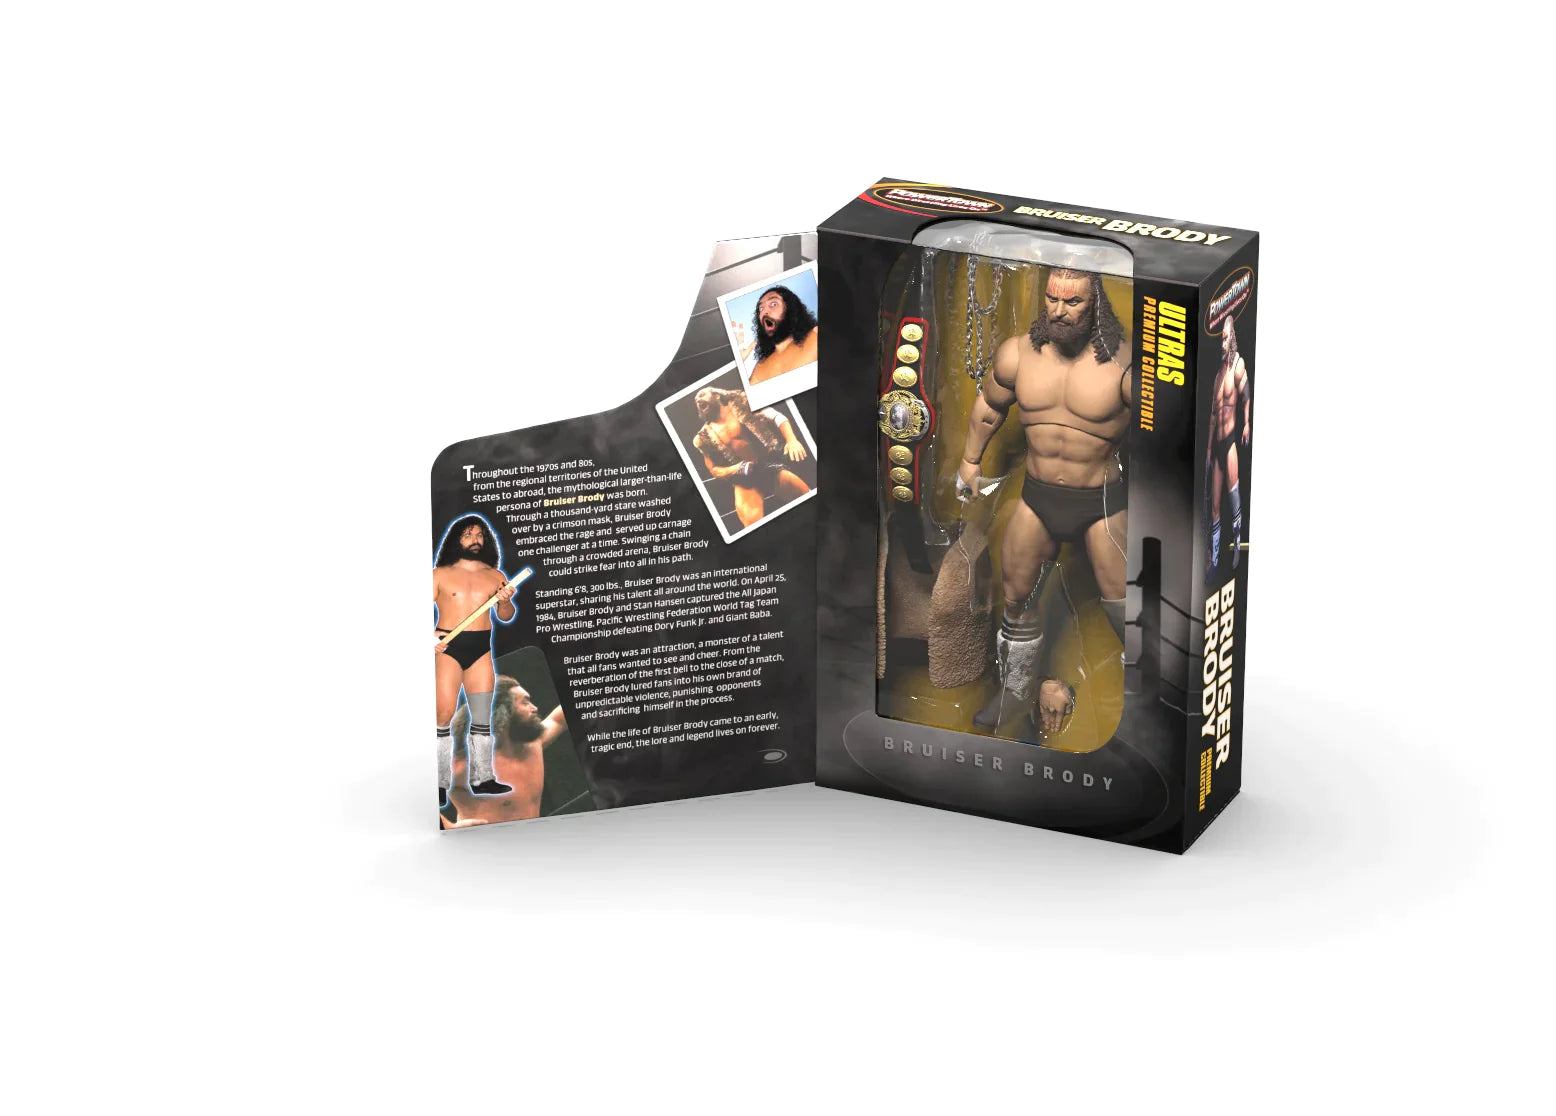 Bruiser Brody - Ultra Series 1 (Uncirculated - For Display Only)